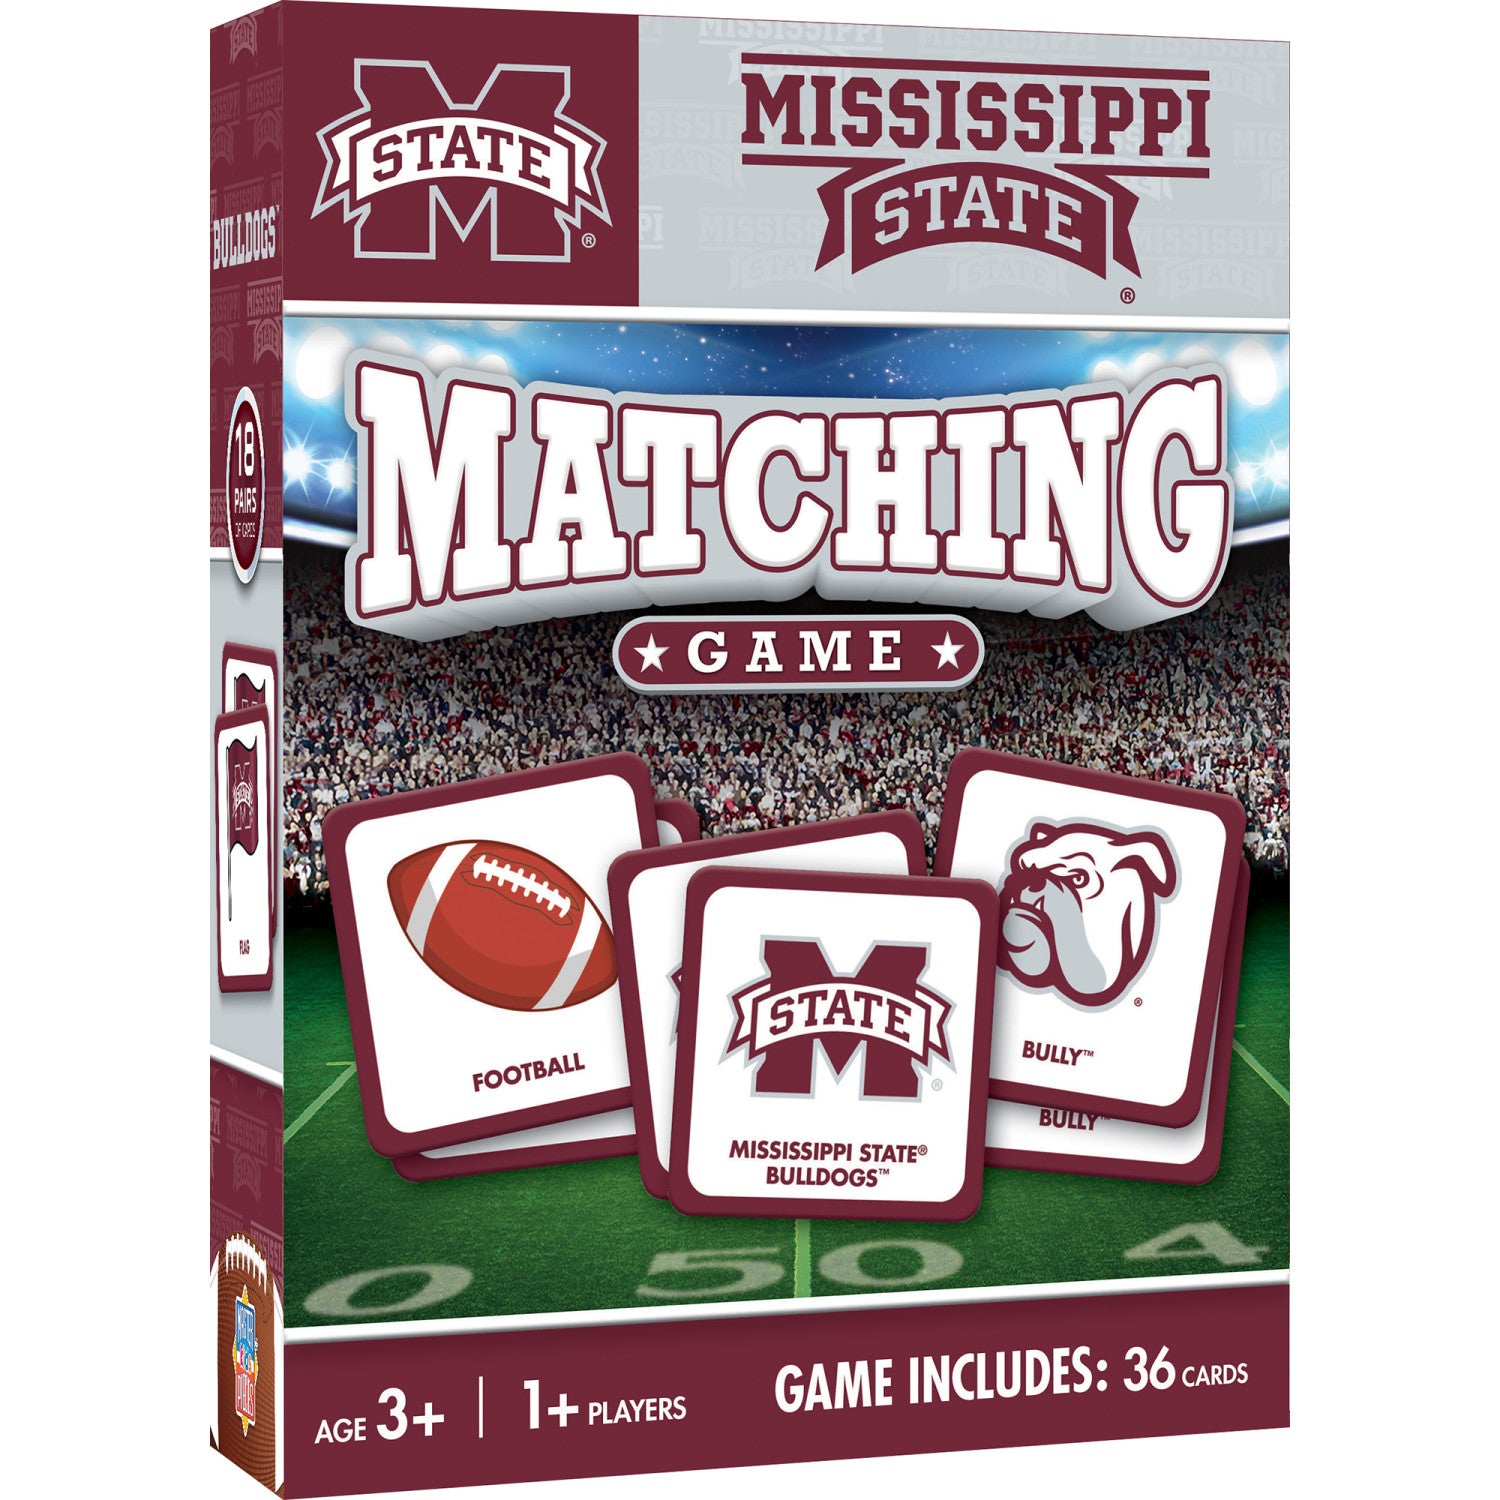 Mississippi State Bulldogs Matching Game